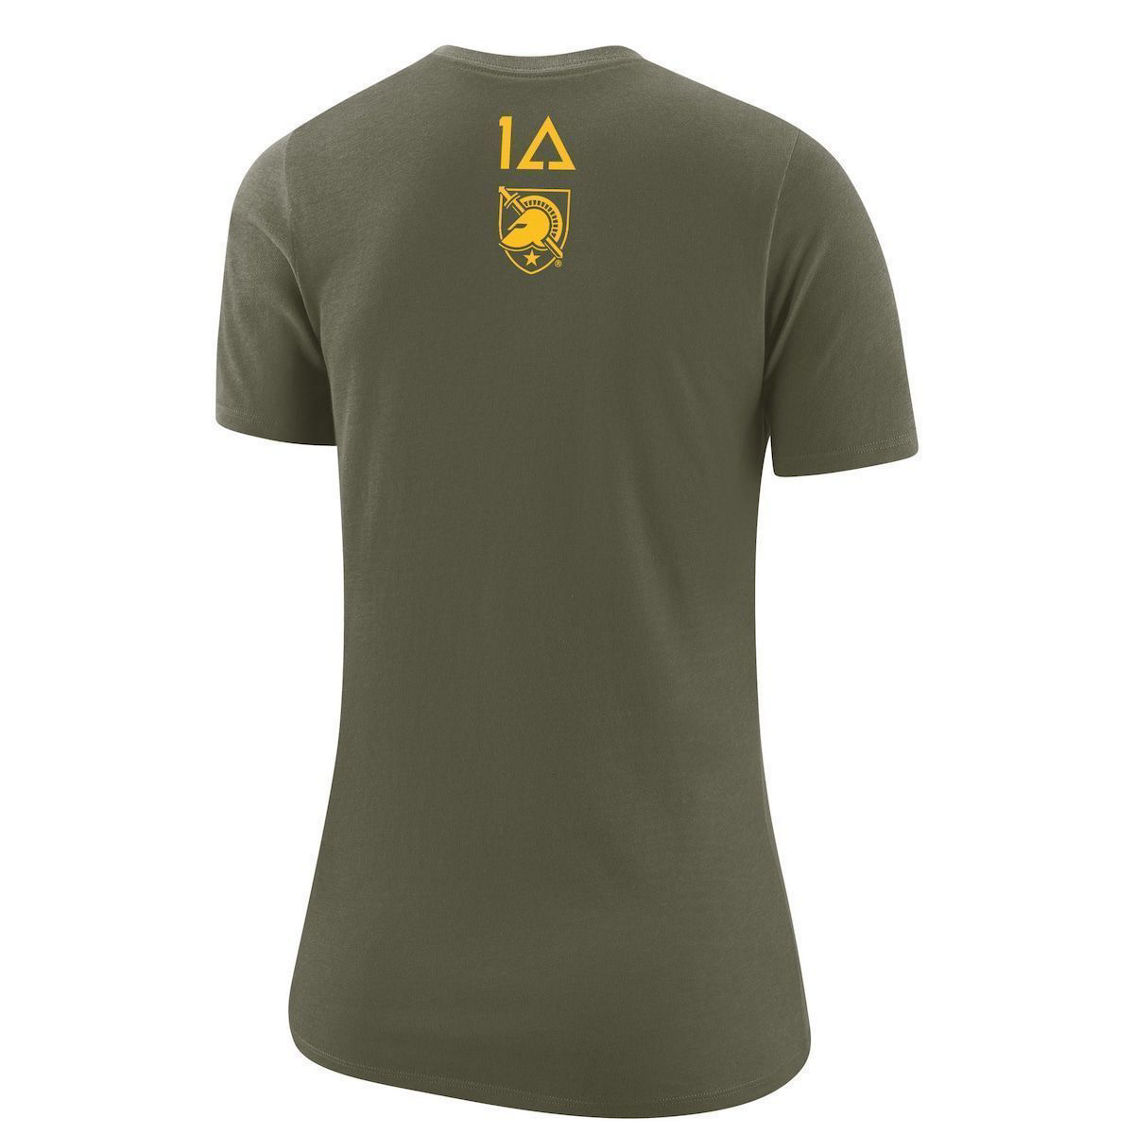 Nike Women's Olive Army Black Knights 1st Armored Division Old Ironsides Operation Torch T-Shirt - Image 4 of 4